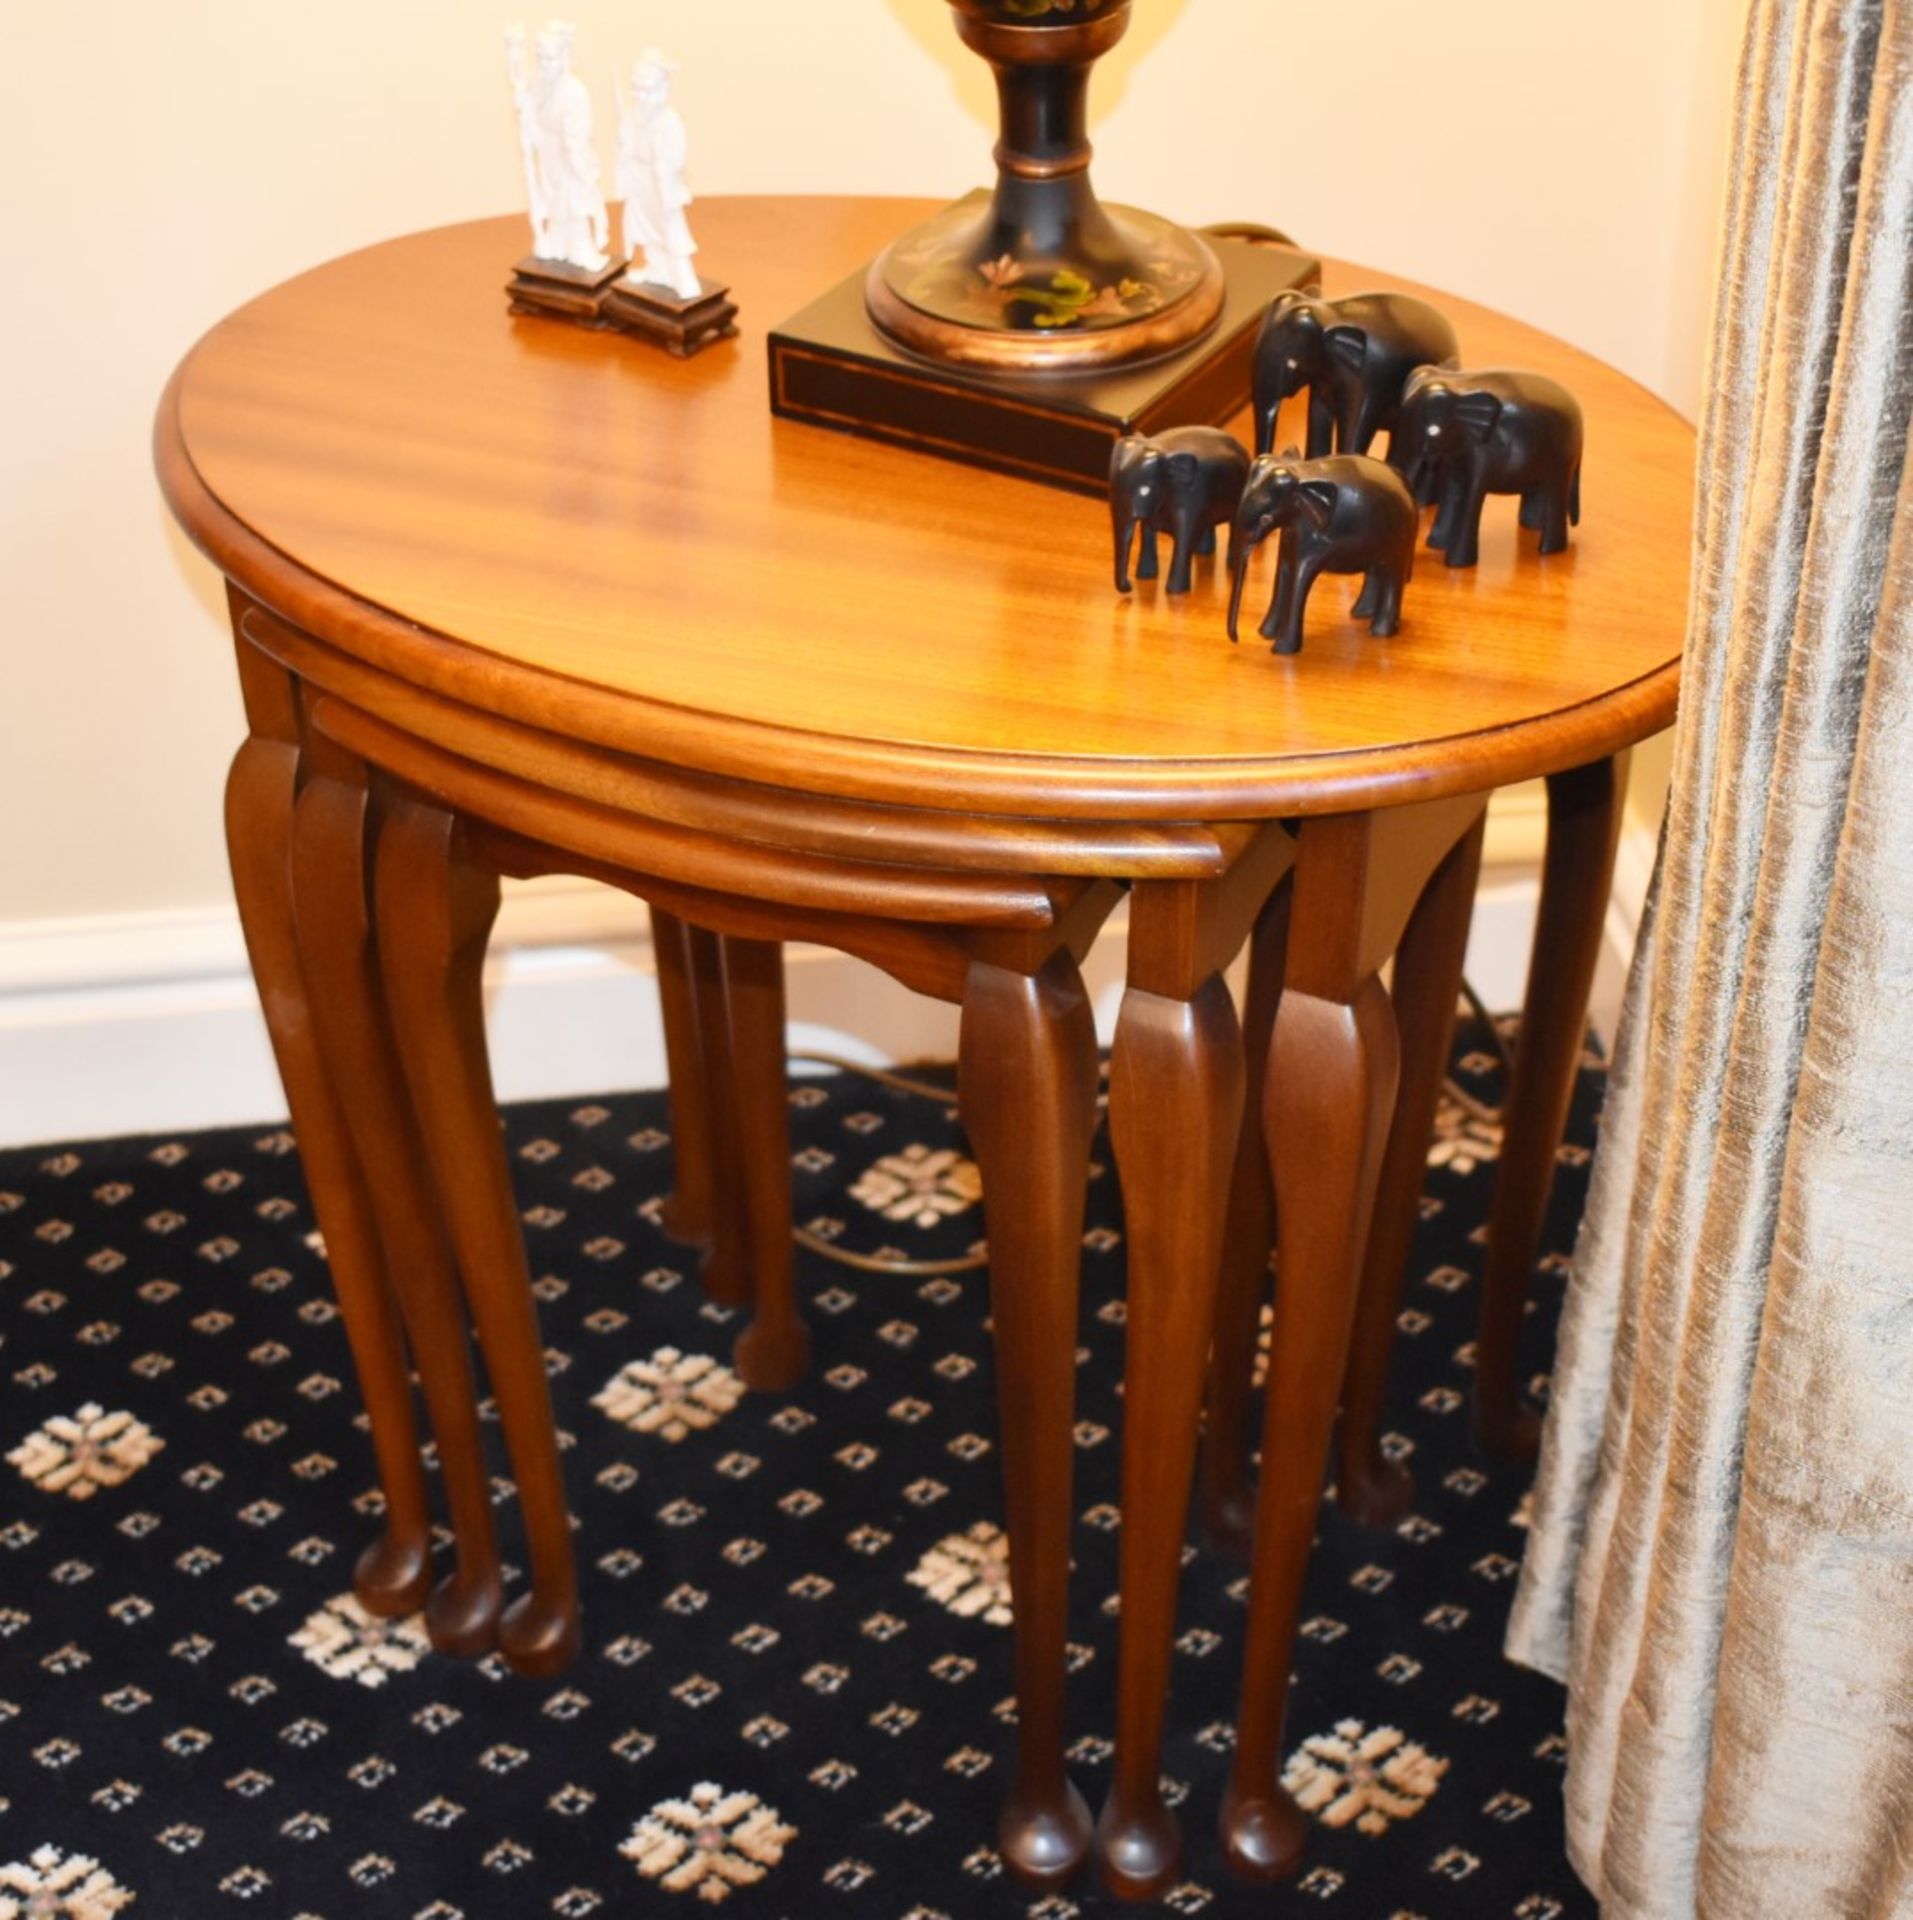 1 x Nest of Three Tables With Queen Anne Legs - Circa 1920's - Recently Restored in Stunning - Image 2 of 8